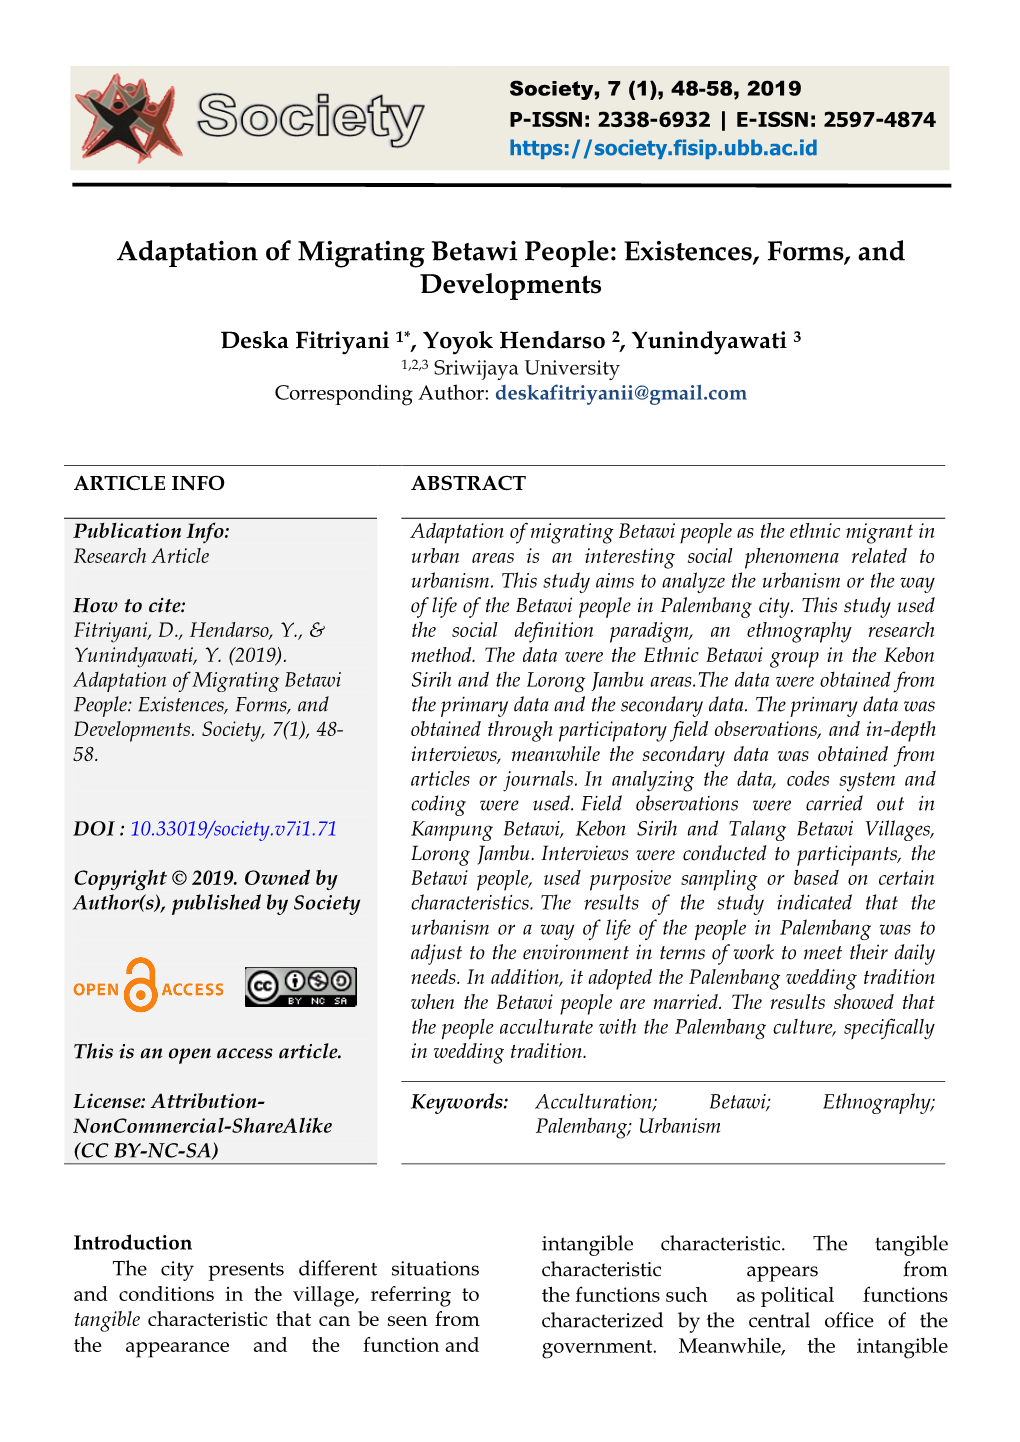 Adaptation of Migrating Betawi People: Existences, Forms, and Developments